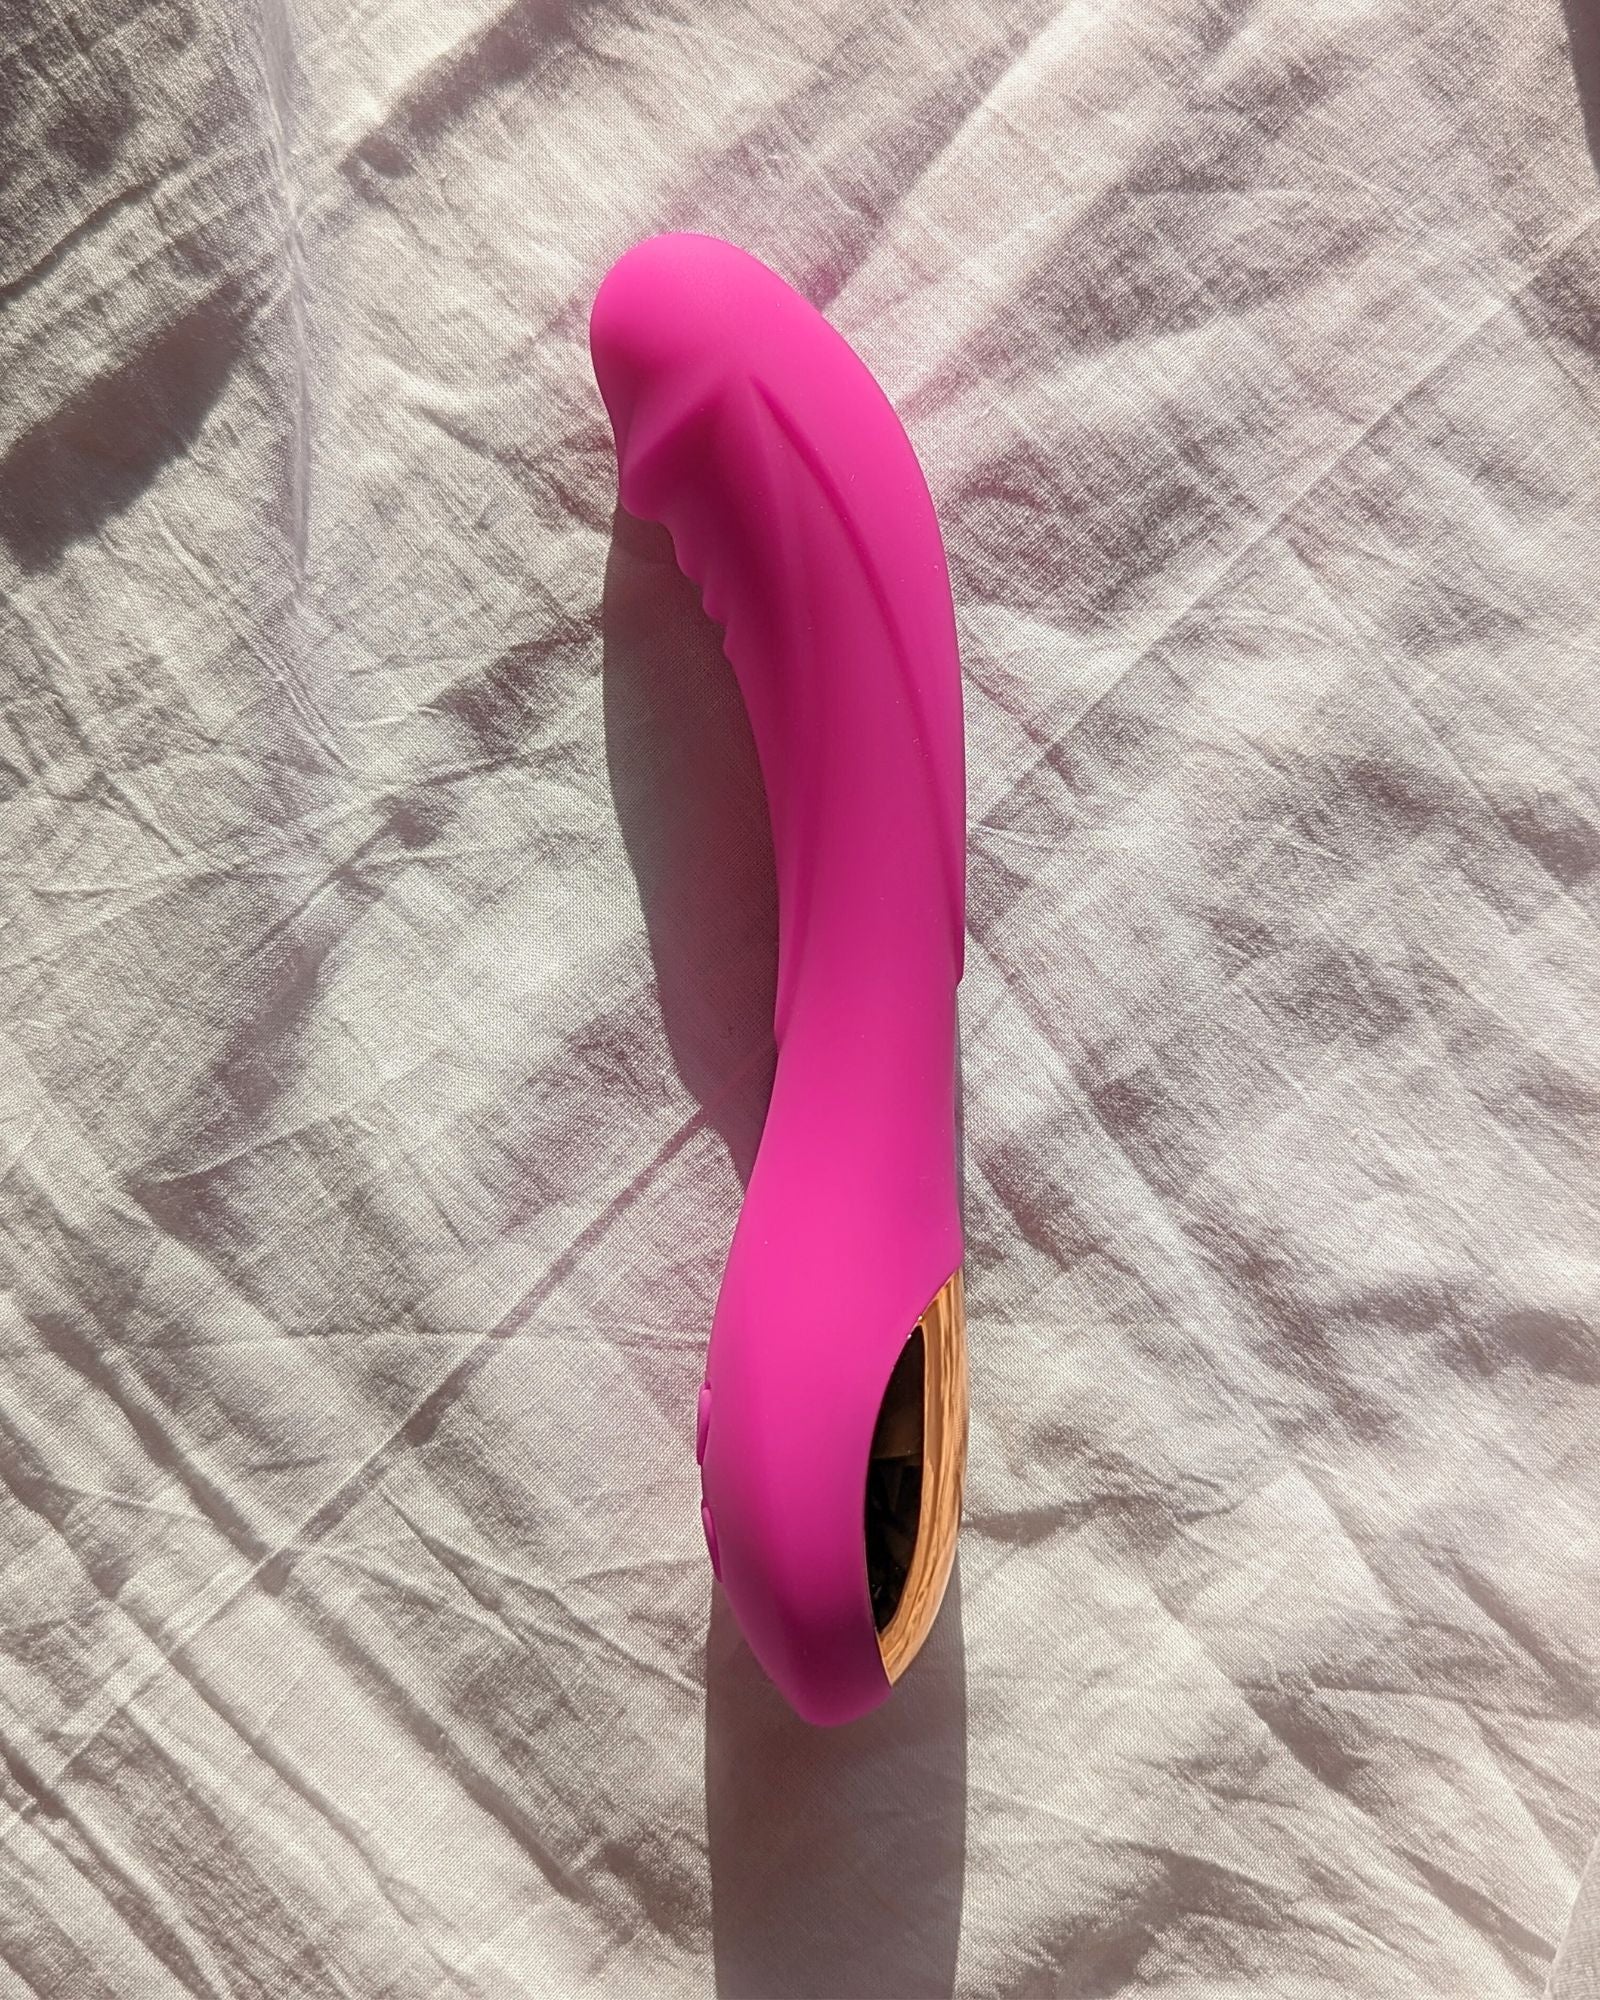 Sangya 55 Mini - Valentine's Day Special Limited Edition Mini Massager